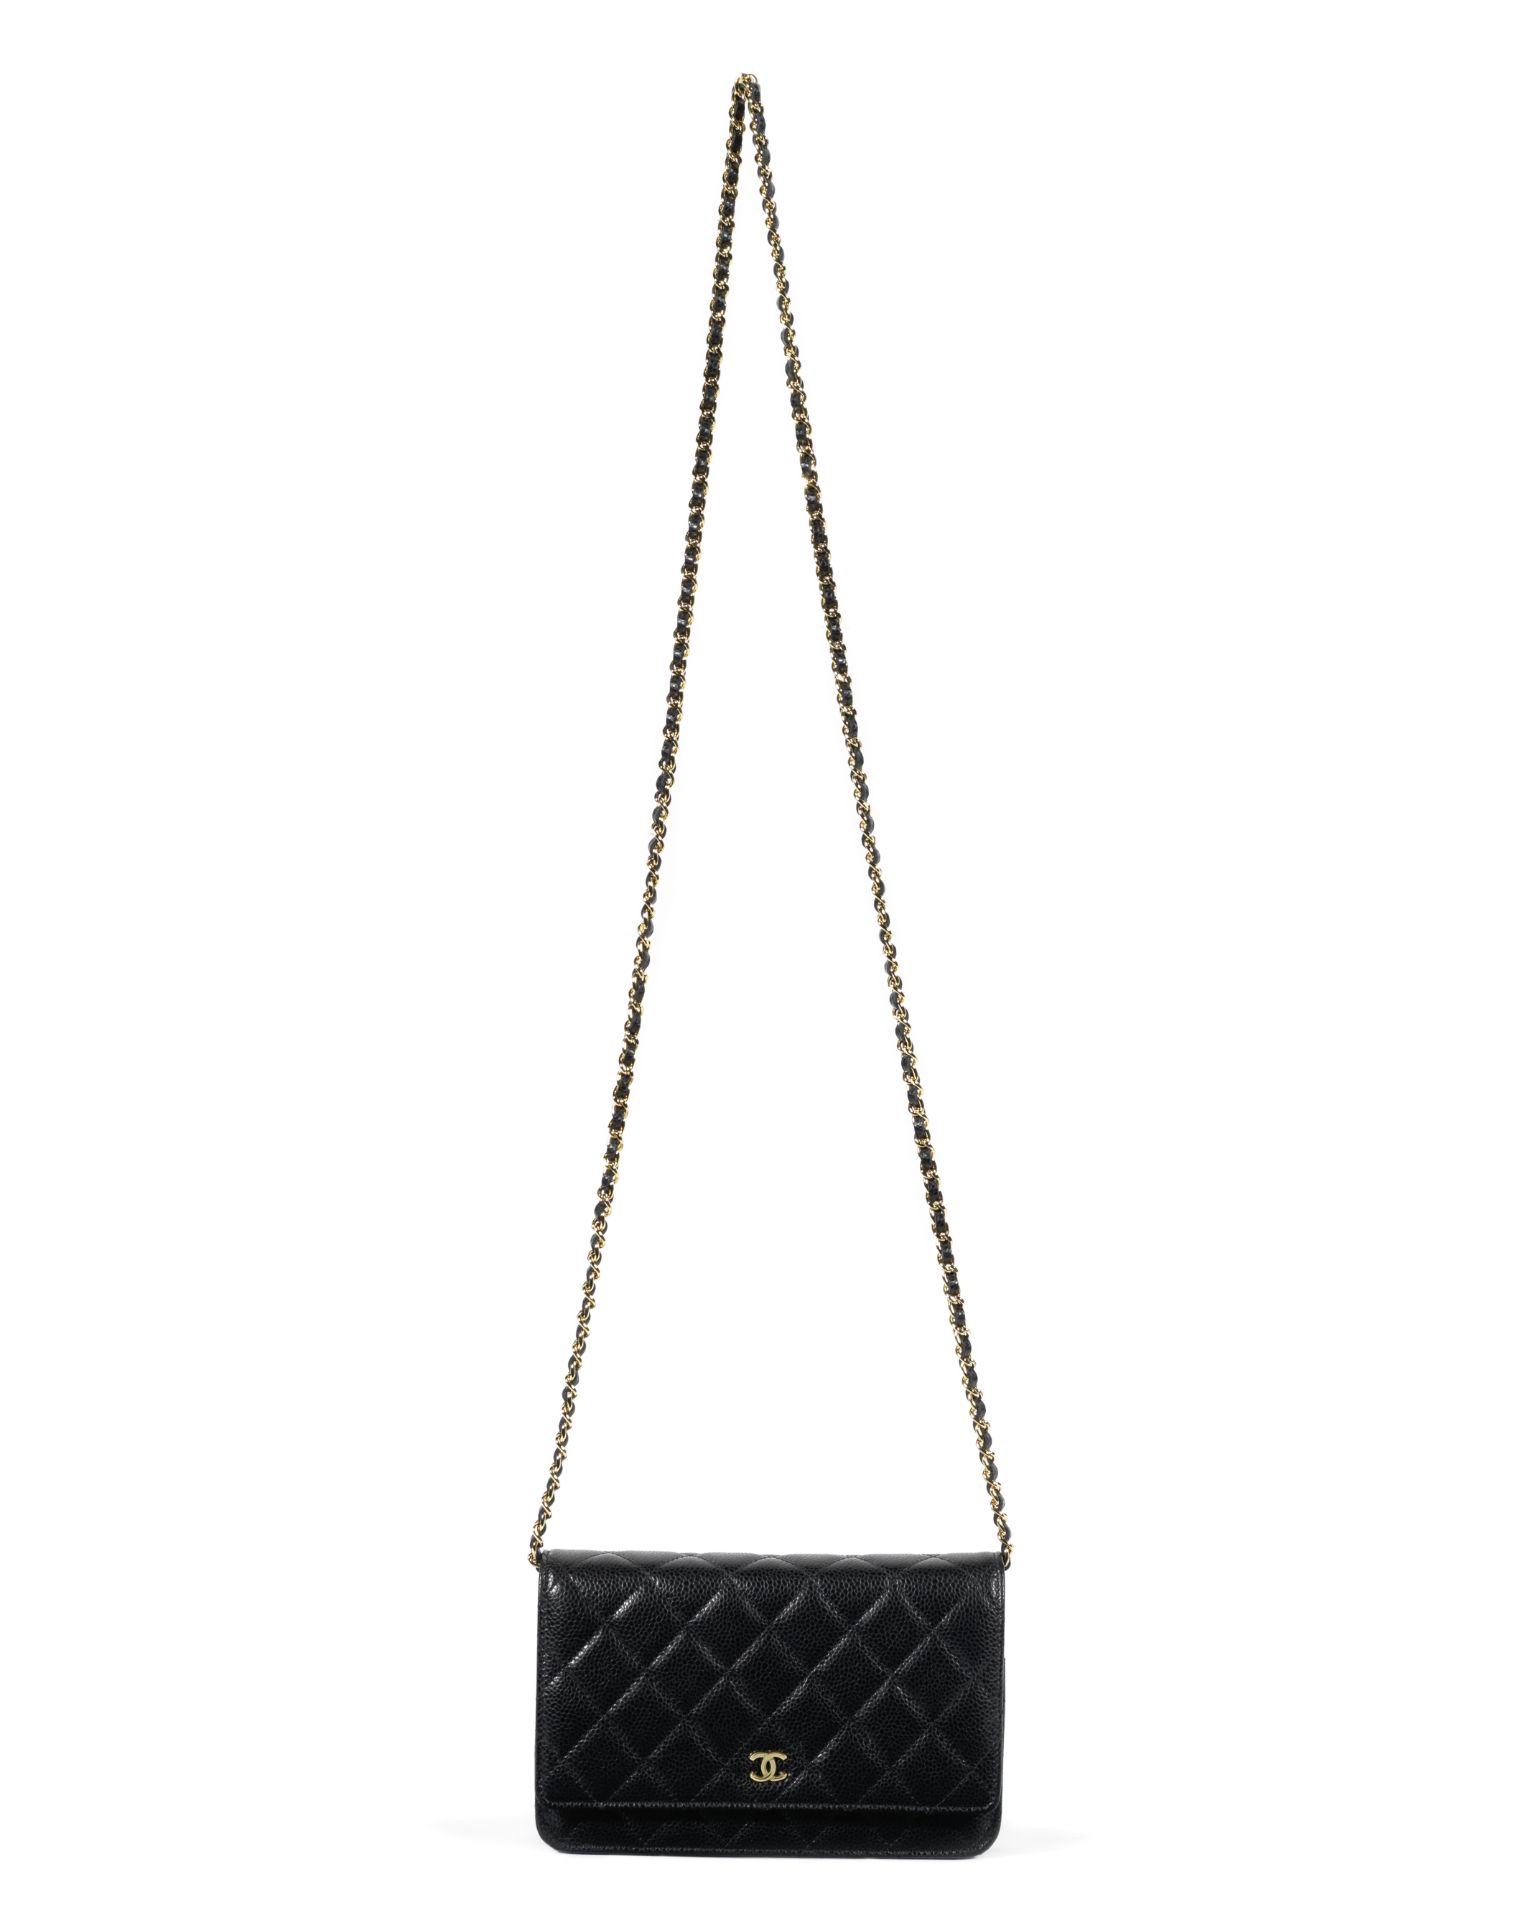 Black Caviar Wallet on Chain, Chanel, c. 2019, (Includes padlock, keys, cloche, and dust bag)